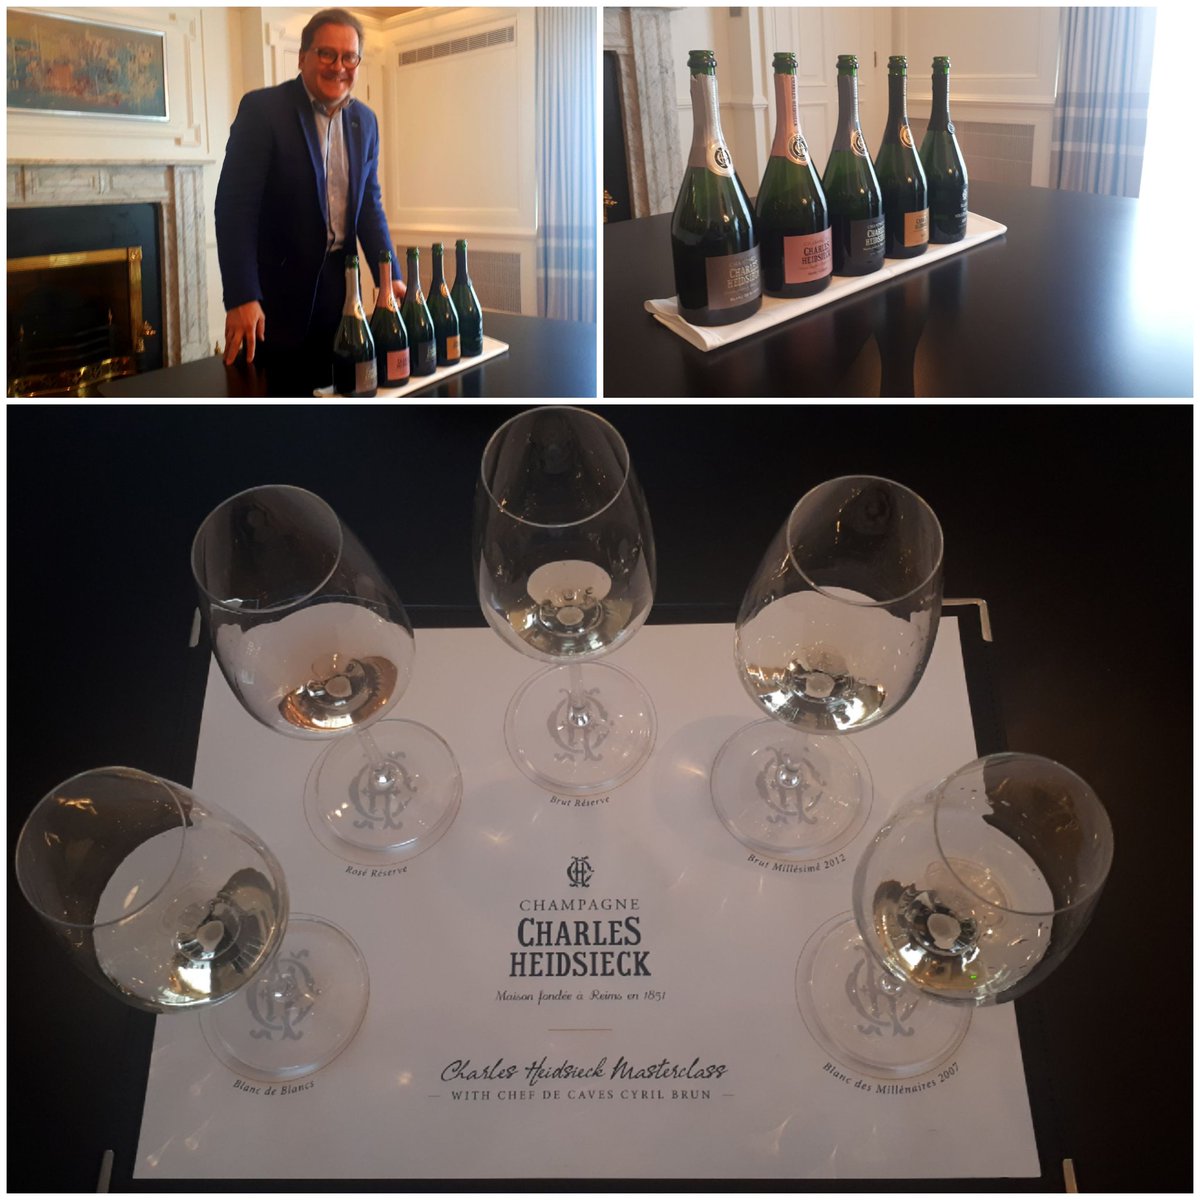 Wonderful morning with Cyril Brun, Chef de Cave at Champagne Charles Heidsieck tasting their range at the Westbury Hotel🍾